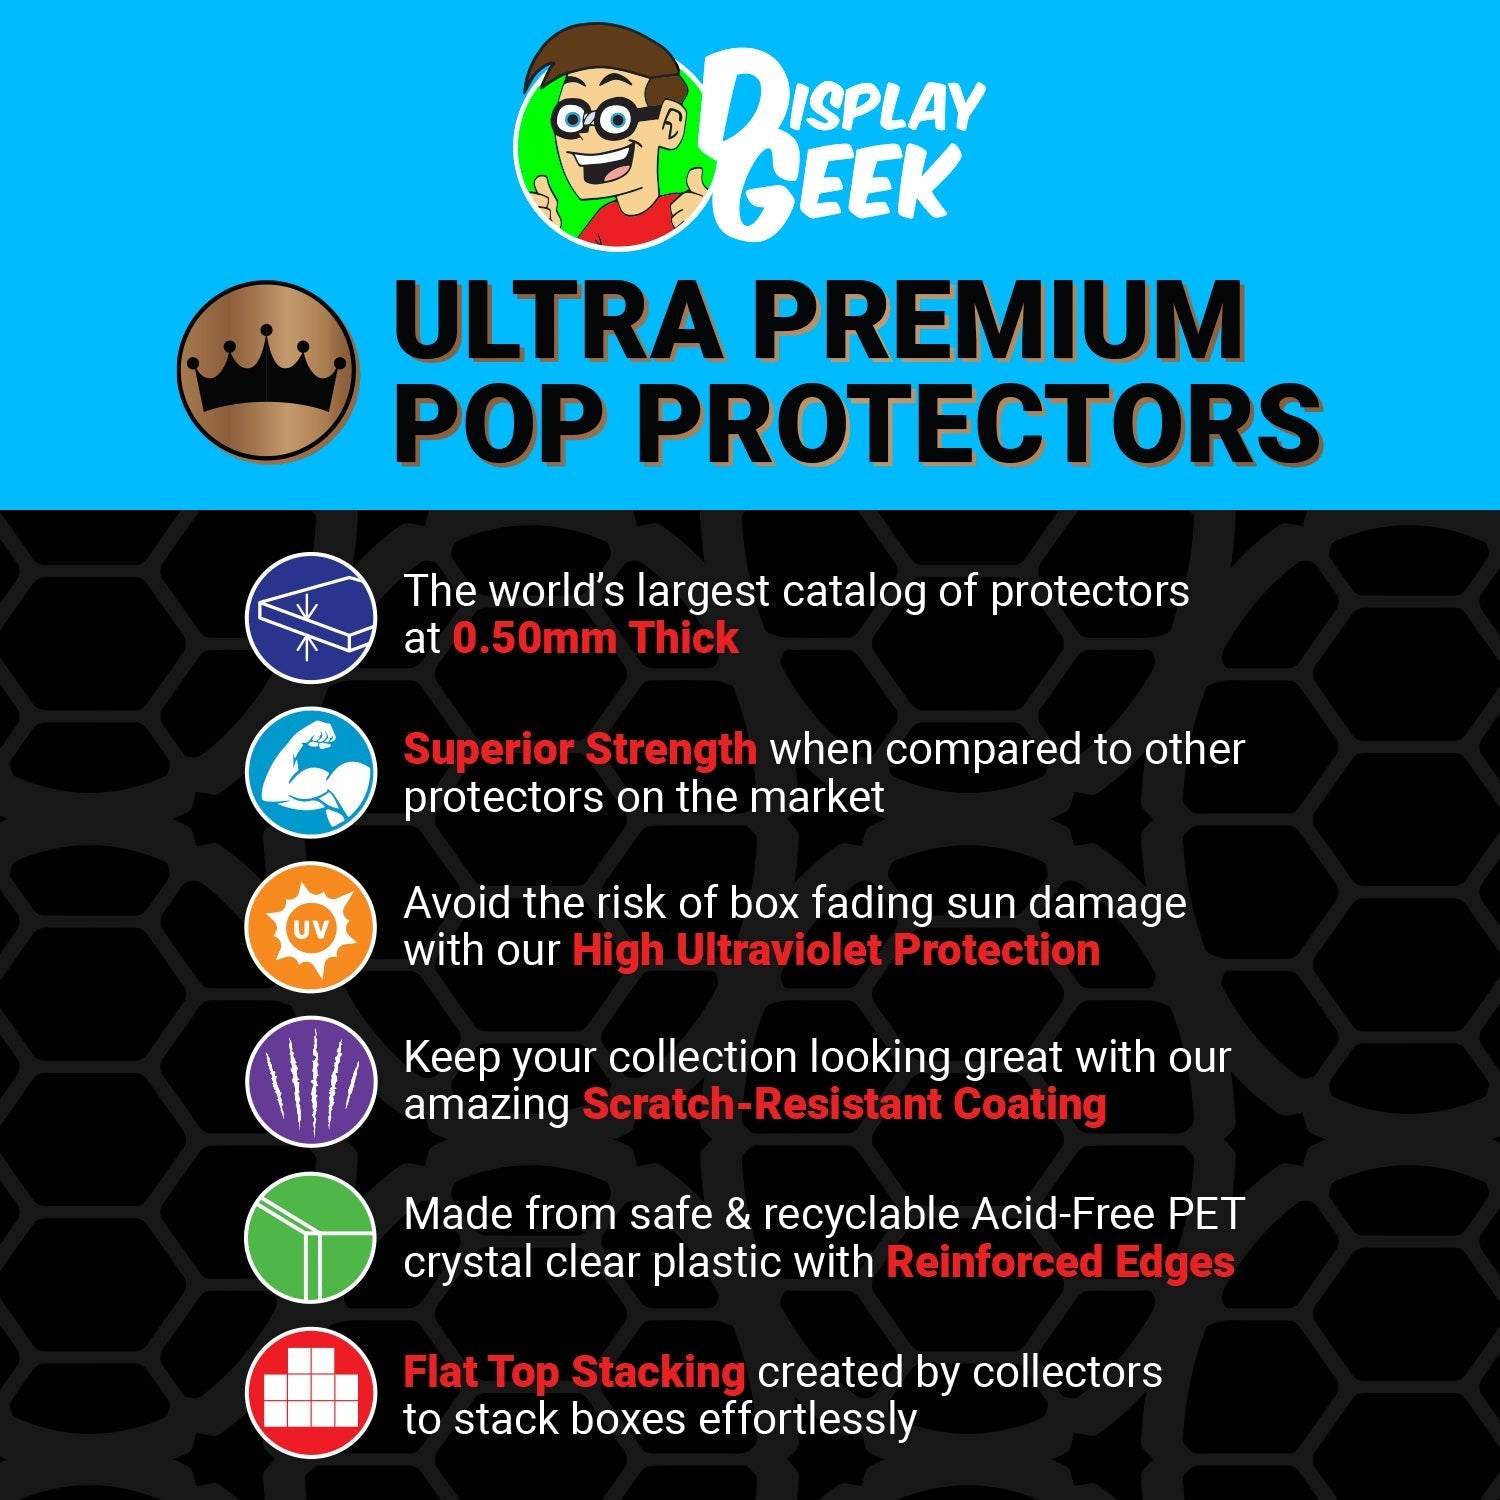 Pop Protector for Green Lantern Hal Jordan #12 Funko Pop Comic Covers - PPG Pop Protector Guide Search Created by Display Geek